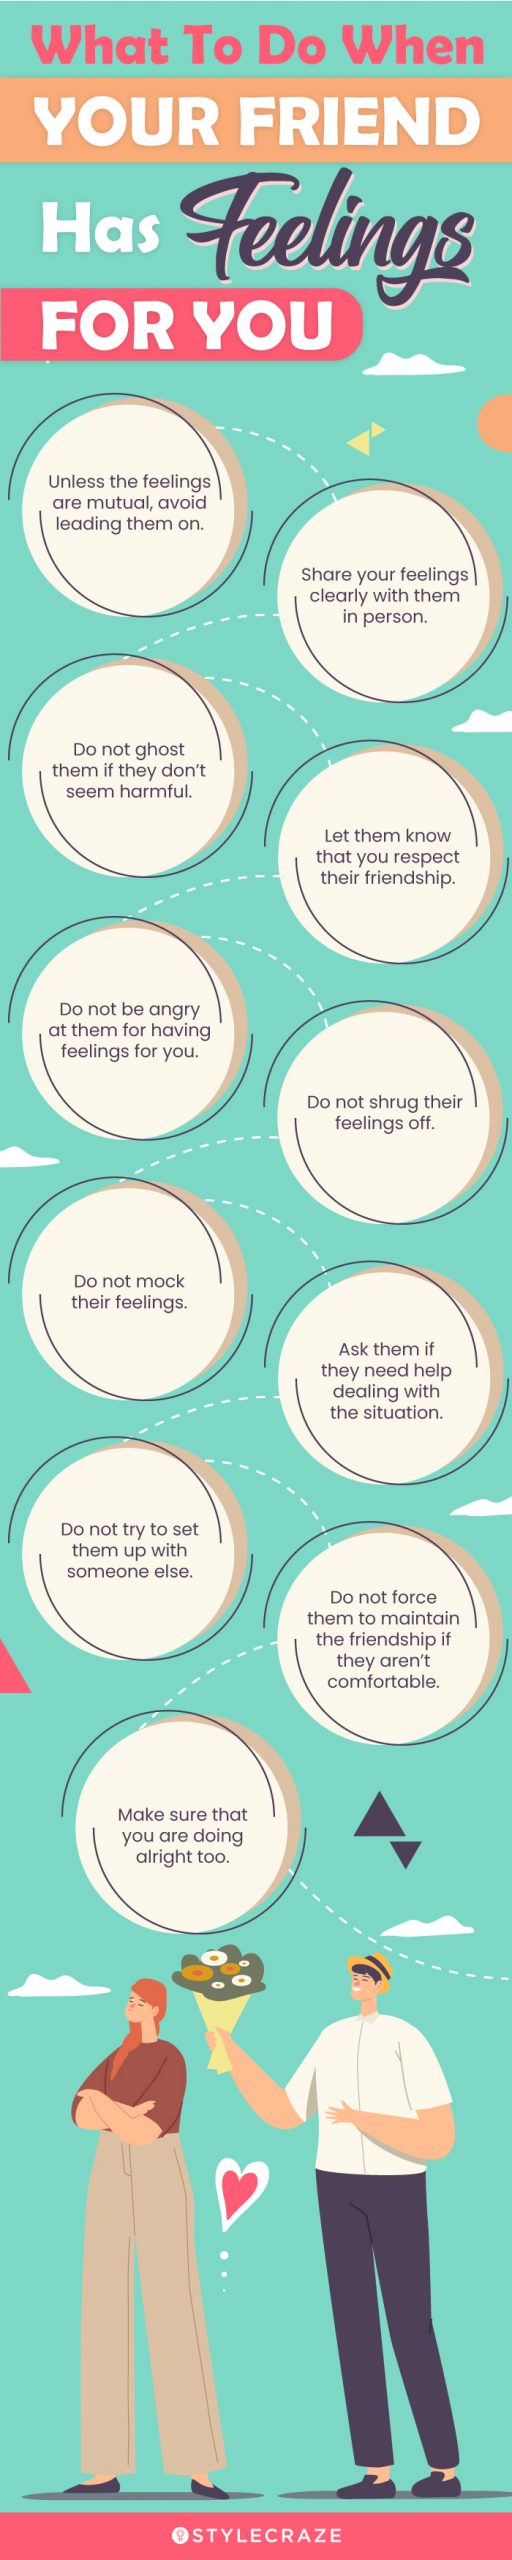 what to do when your friend has feelings for you [infographic]